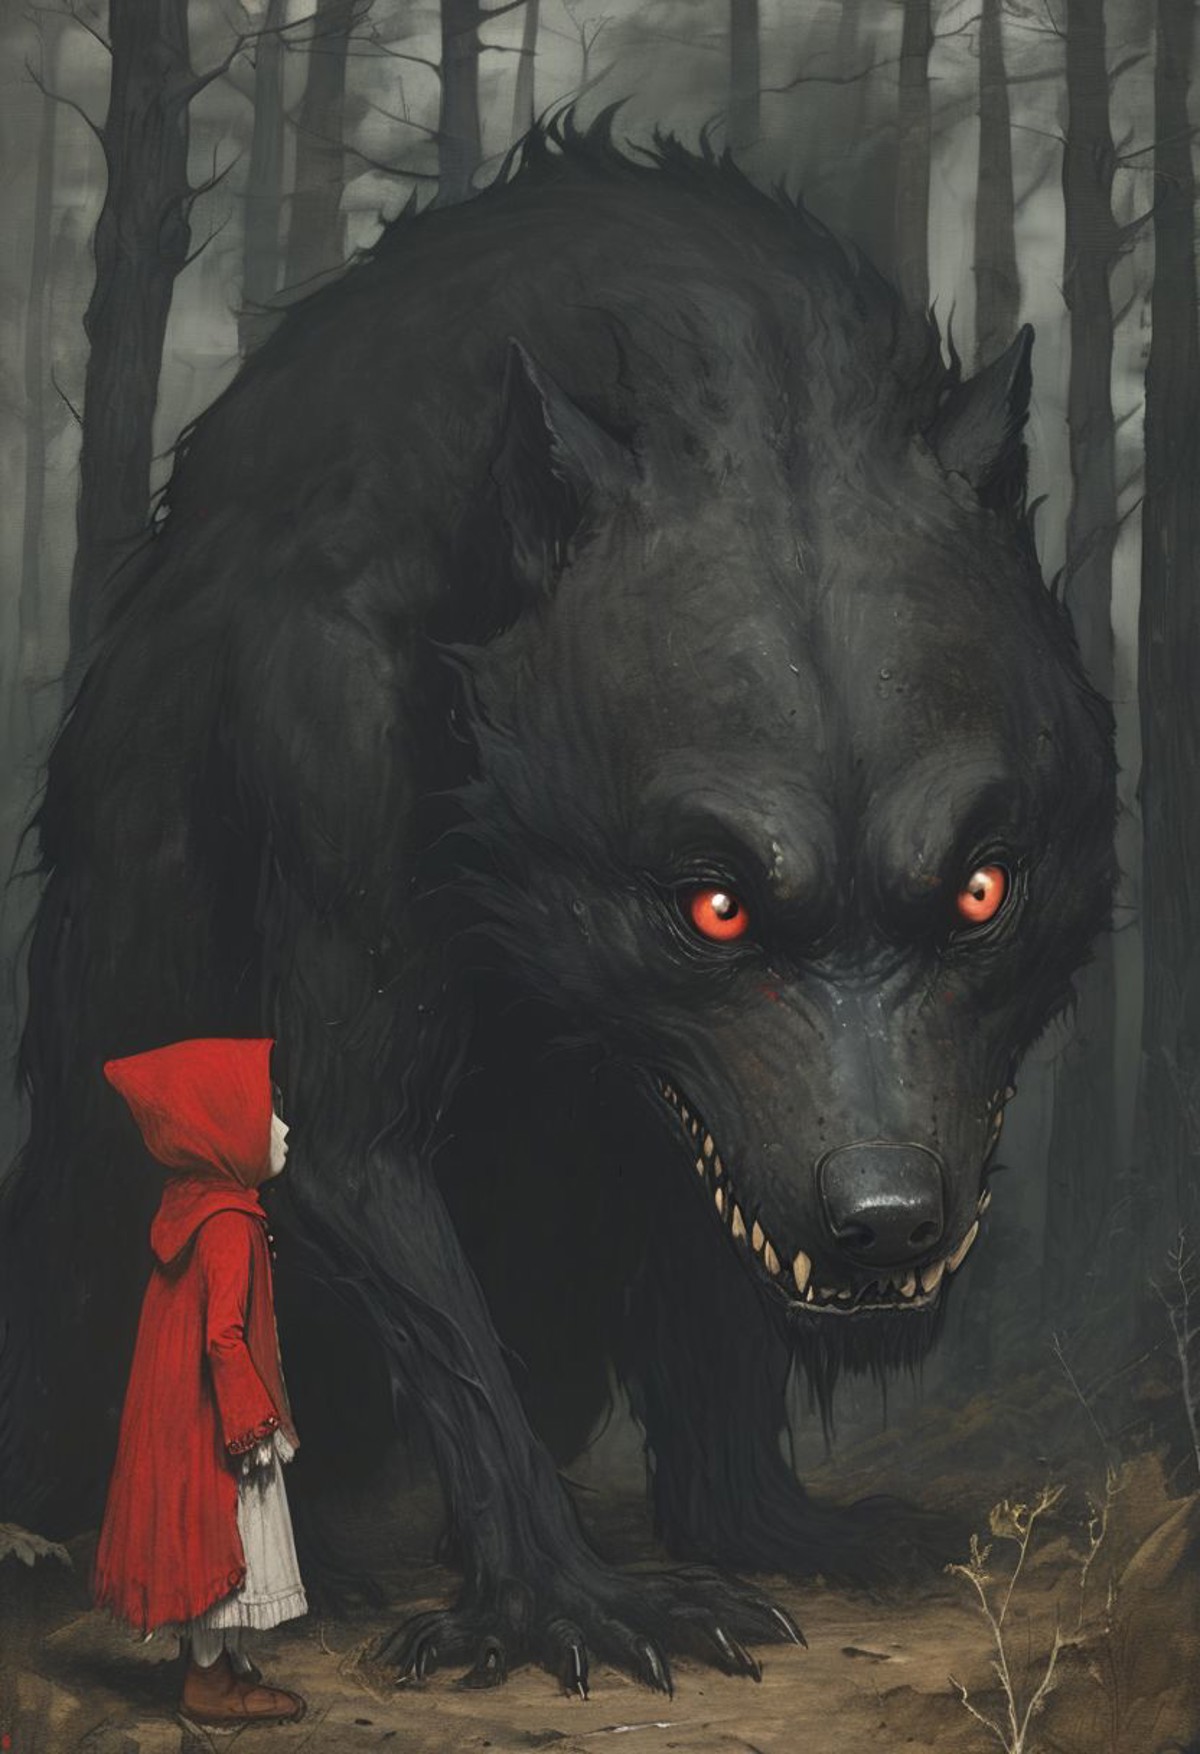 Little Red Riding Hood meeting big black wolf in dark forest